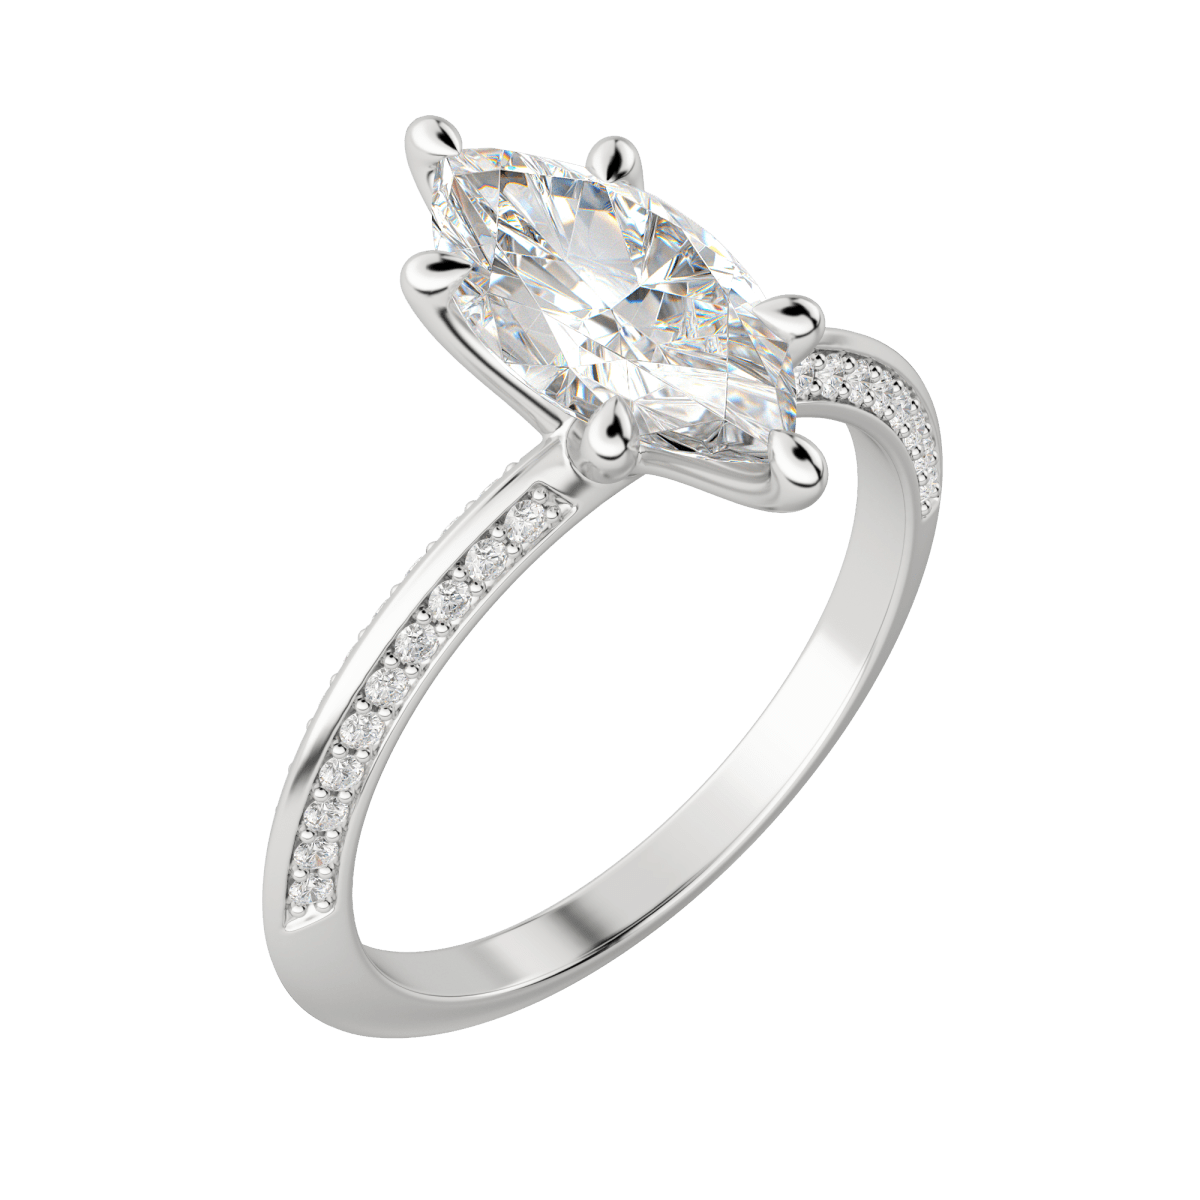 18Kt White Gold Antique Filigree Marquise Shaped Design Diamond Ring |  Jewelers in Rochester, NY